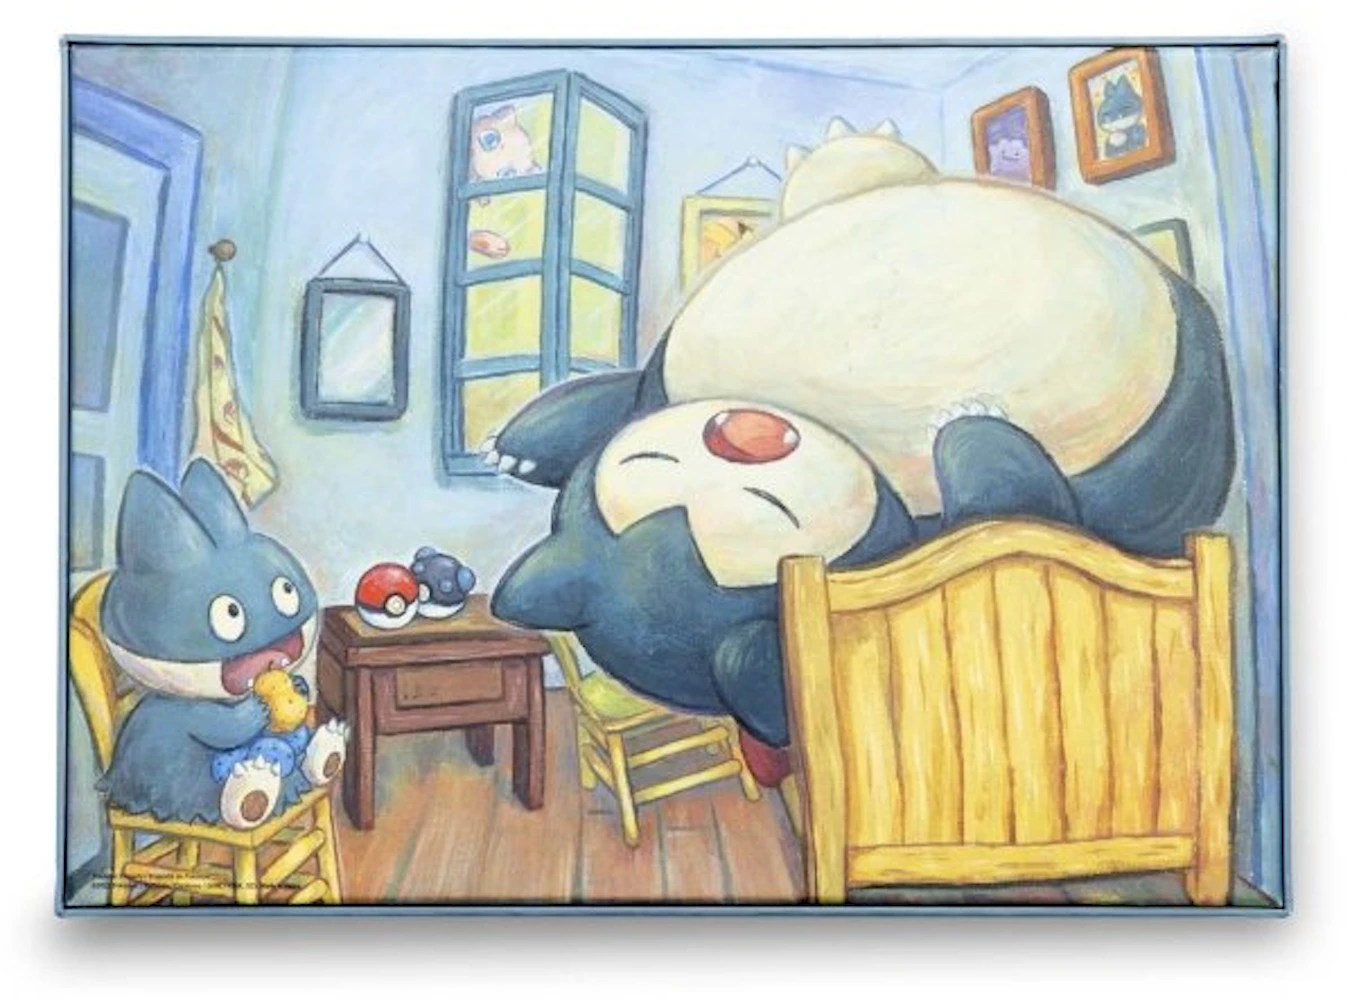 https://images.stockx.com/images/Pokemon-Center-x-Van-Gogh-Museum-Munchlax-Snorlax-Inspired-by-The-Bedroom-Puzzle.jpg?fit=fill&bg=FFFFFF&w=700&h=500&fm=webp&auto=compress&q=90&dpr=2&trim=color&updated_at=1696273747